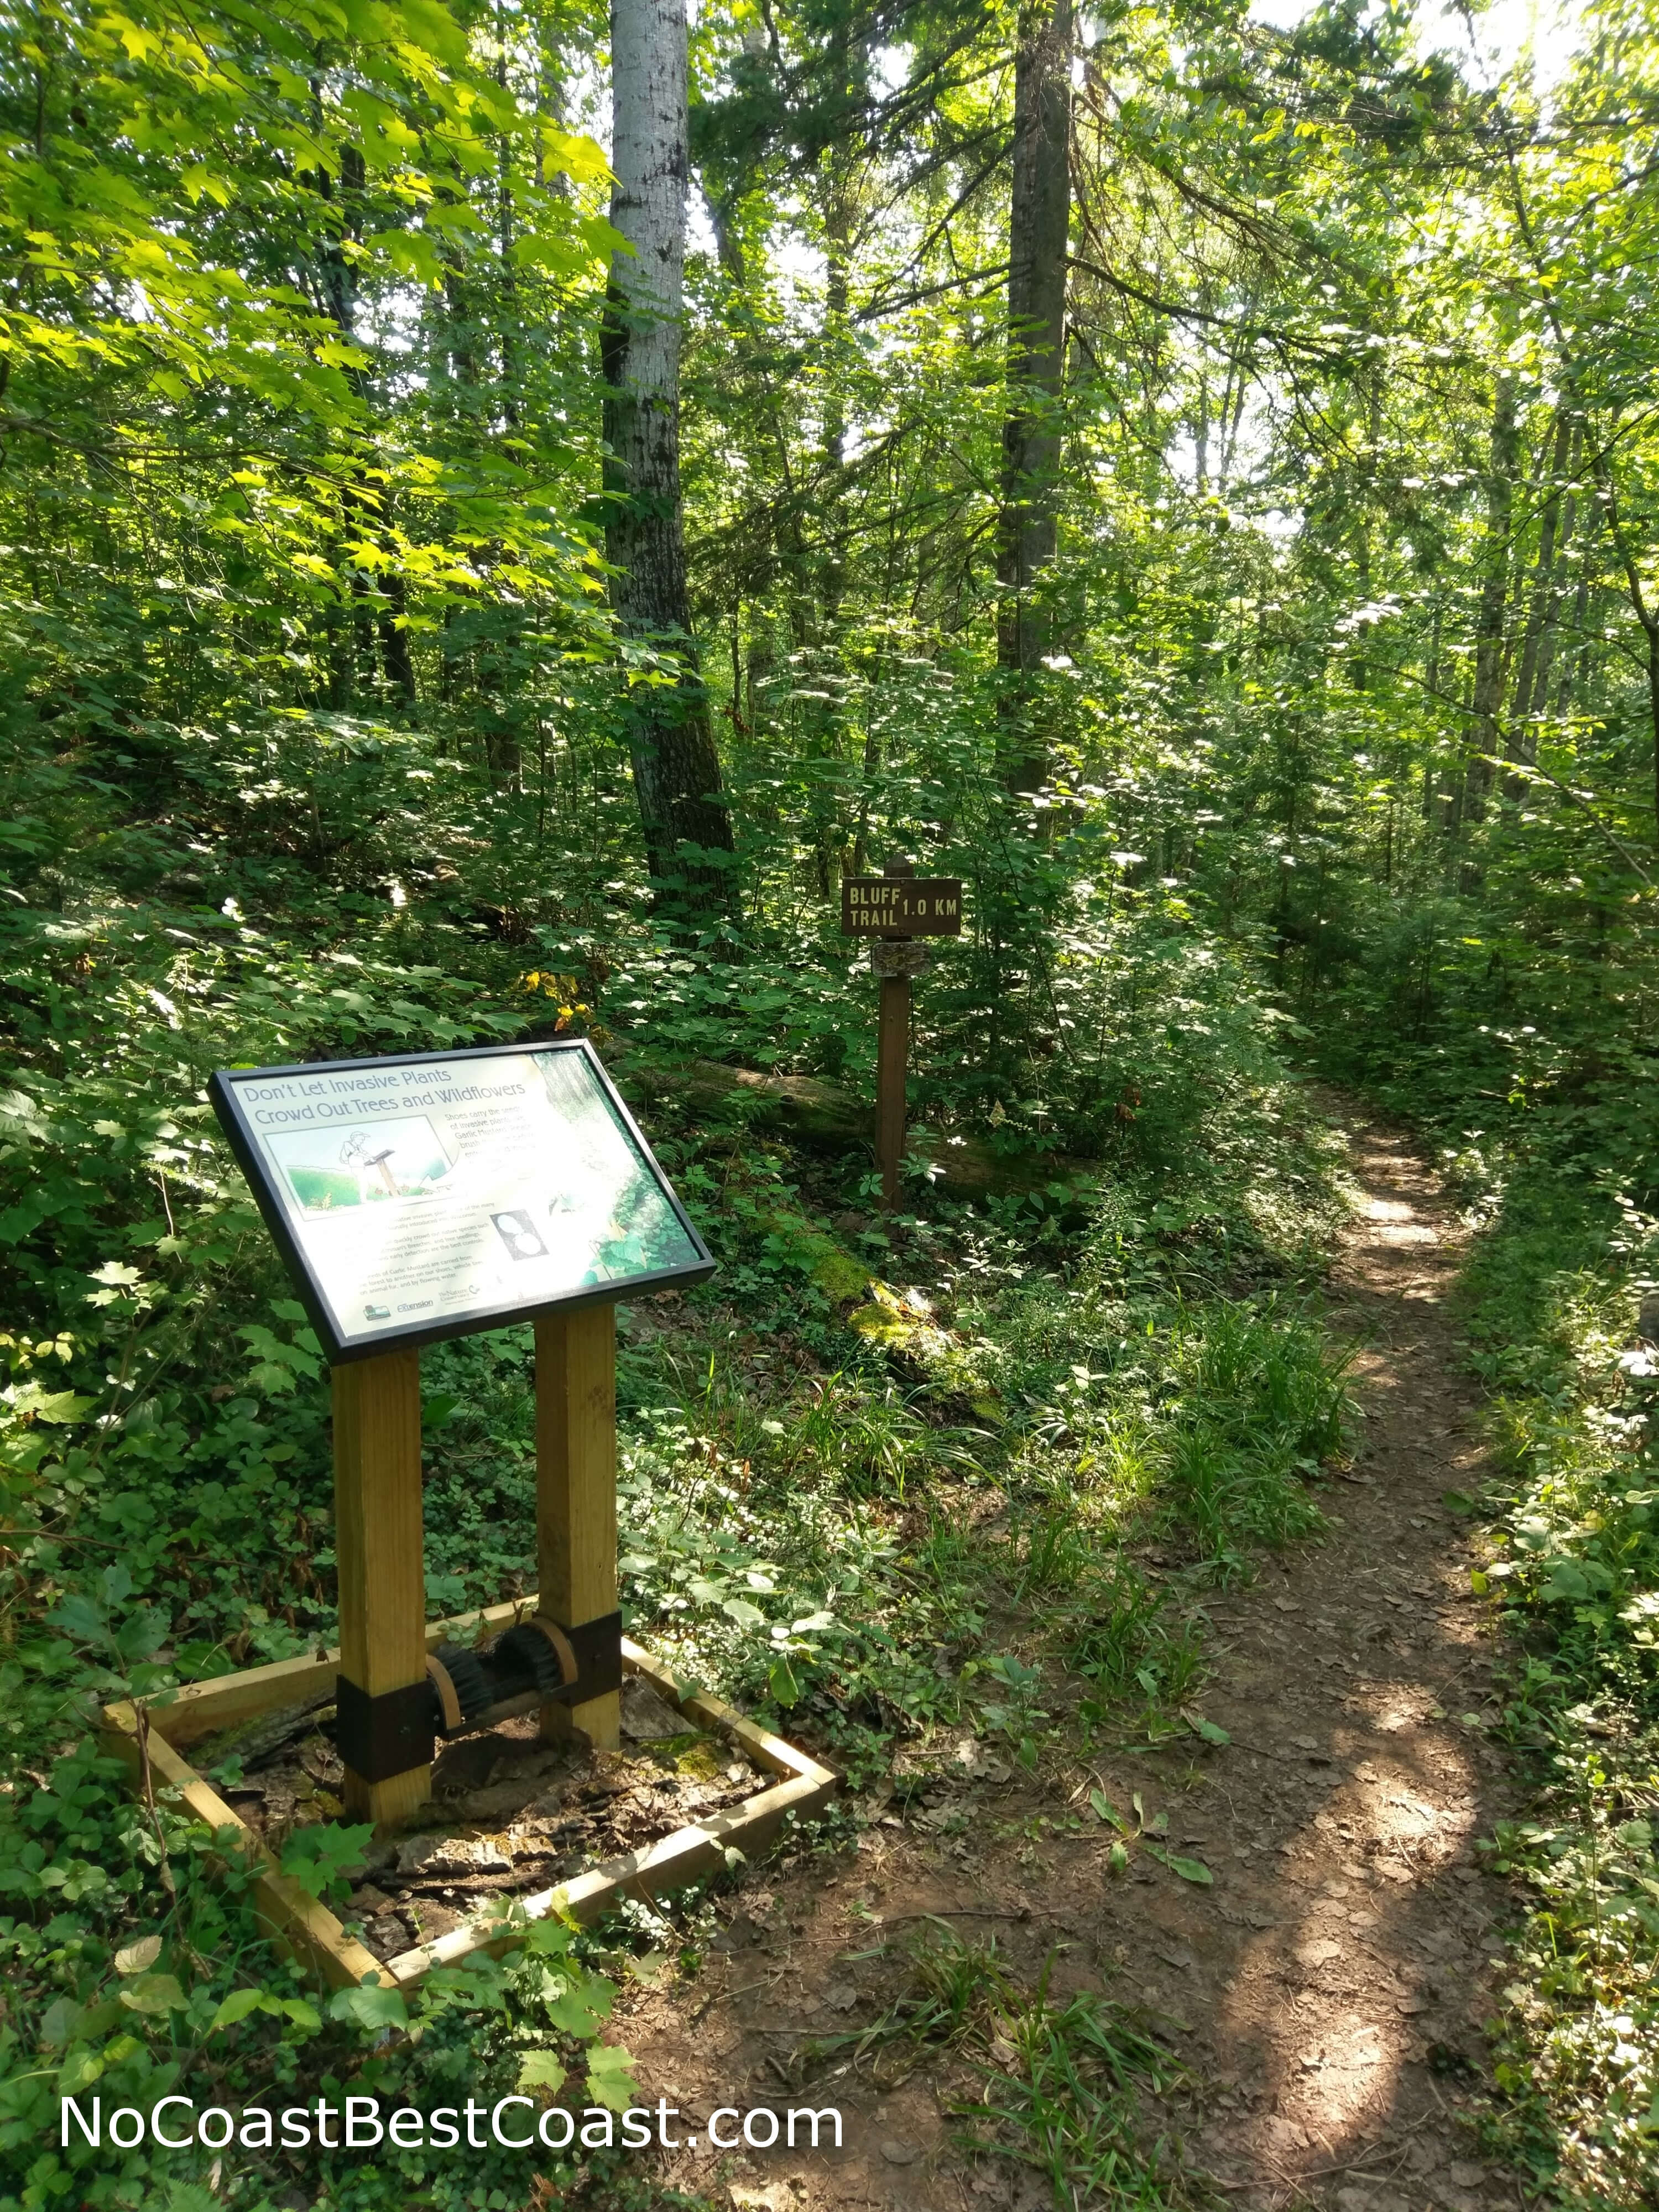 The boot brushes and trail signs let you know you're going the right way